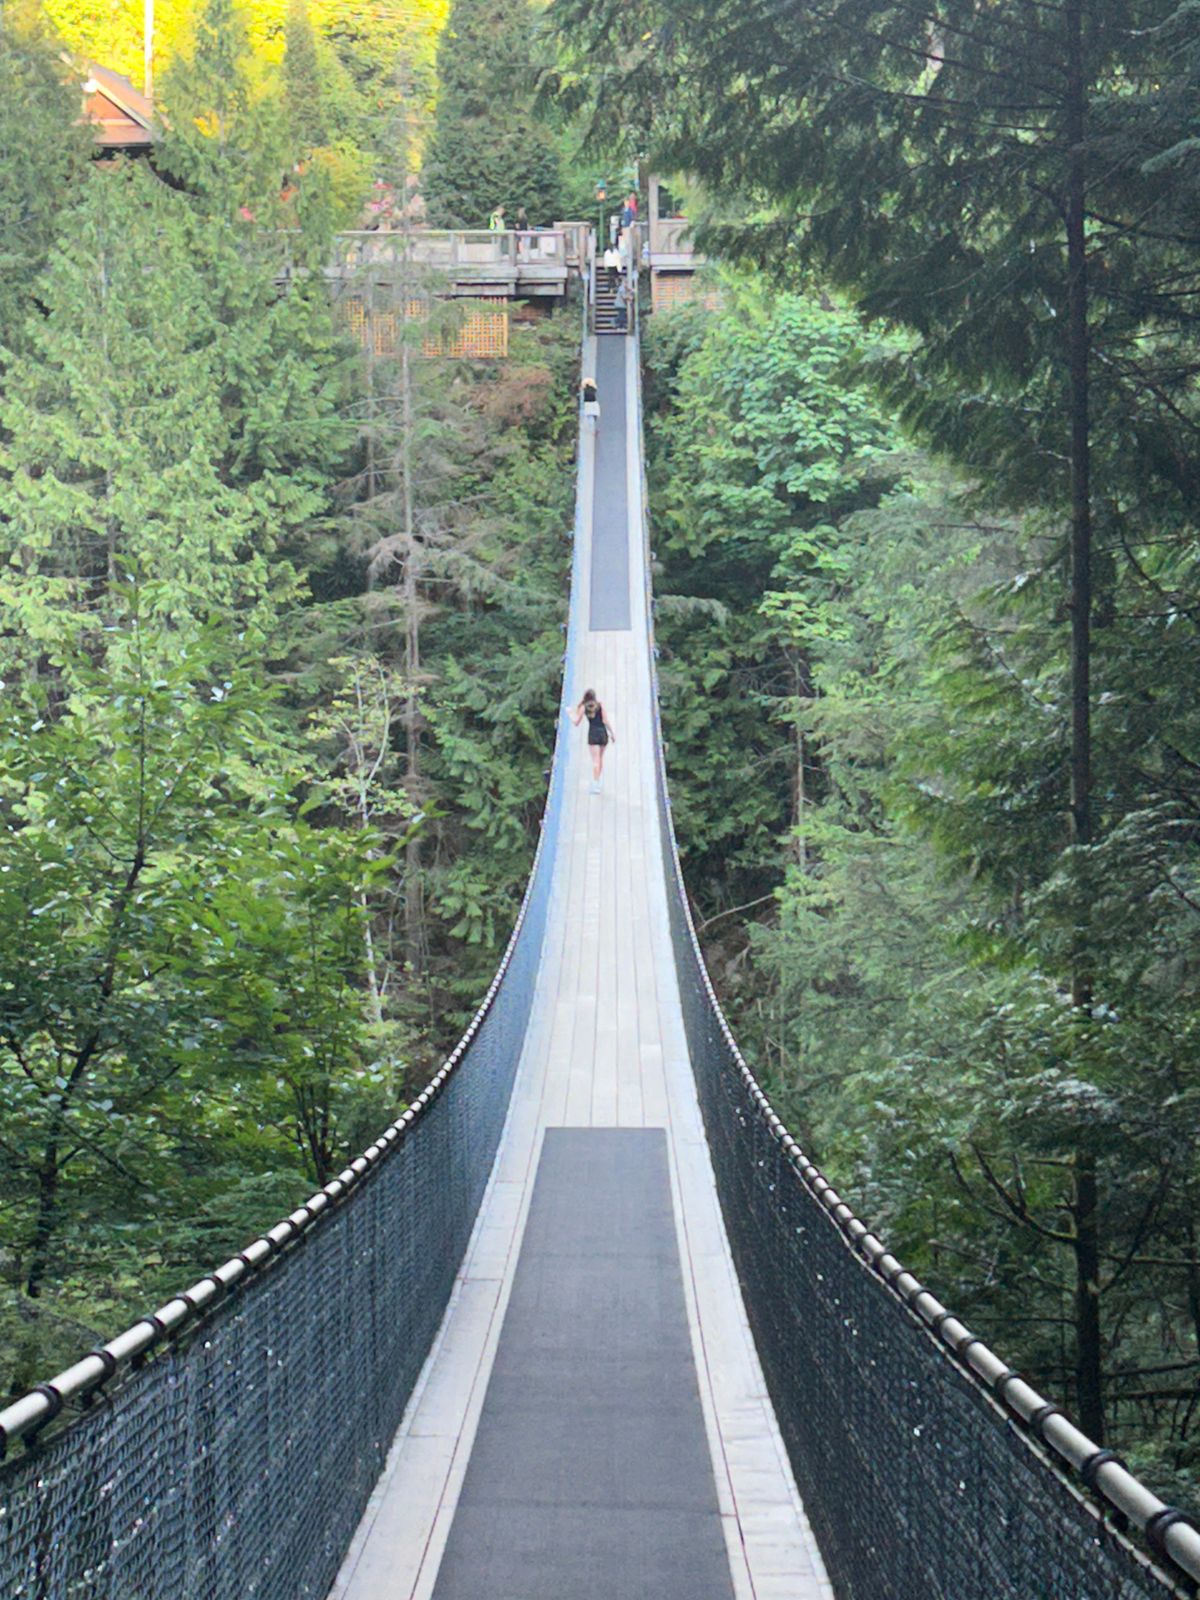 The Capilano Suspension Bridge Park is part of a walk through a rainforest canopy with a trek above a canyon near Vancouver.  (Photo courtesy of Ed Condran)